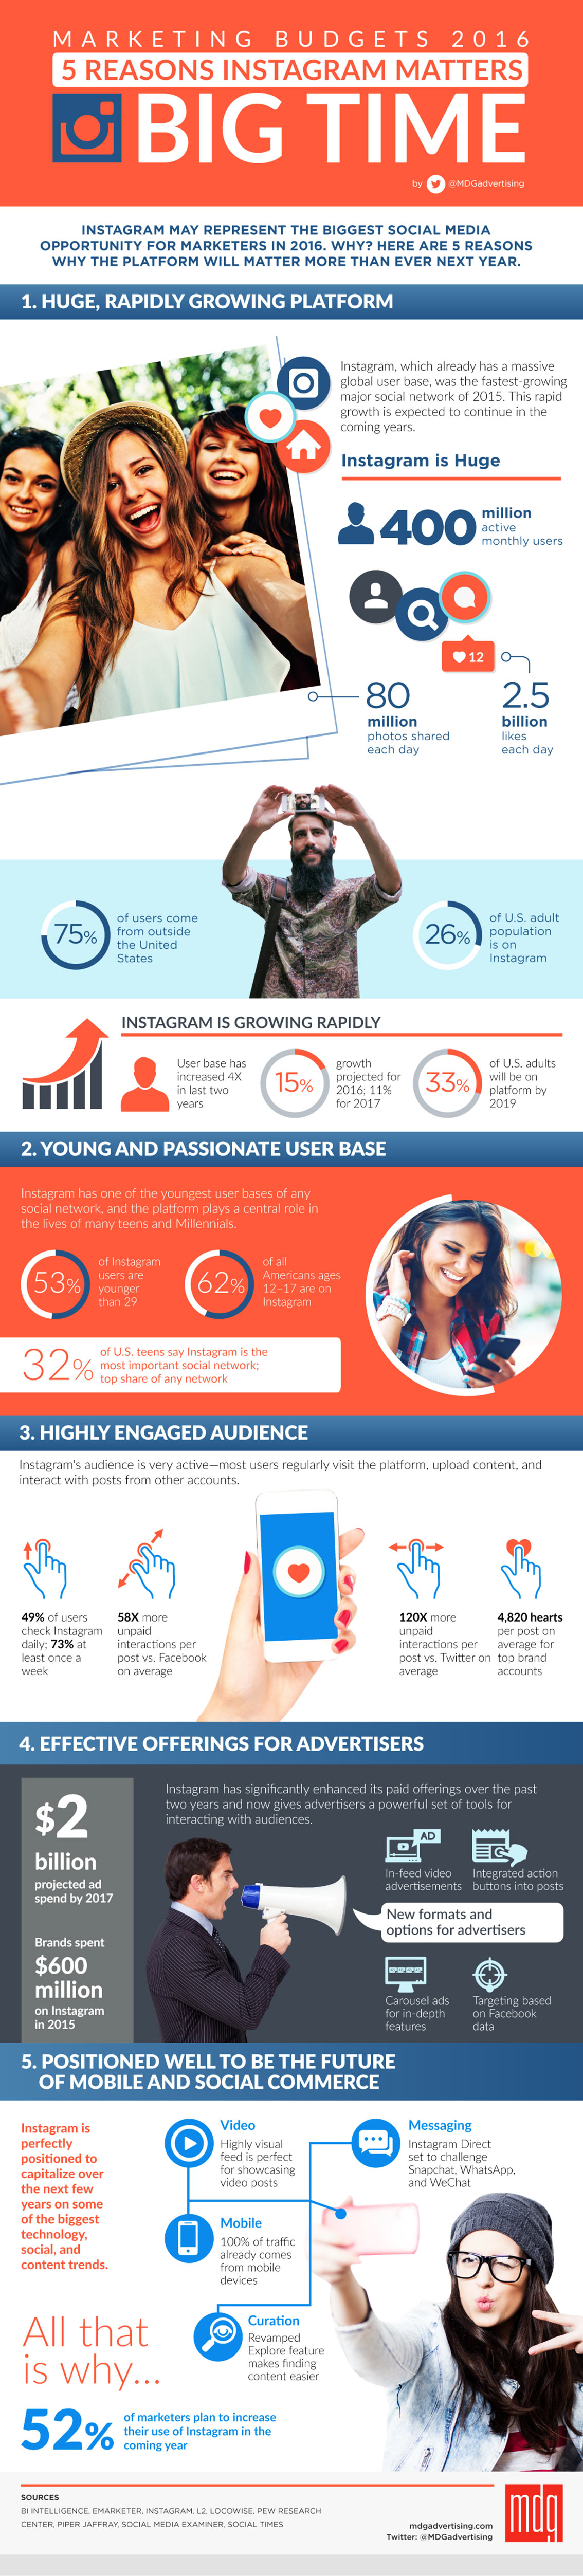 Reasons Why Instagram Matters for Business Marketers Infographic